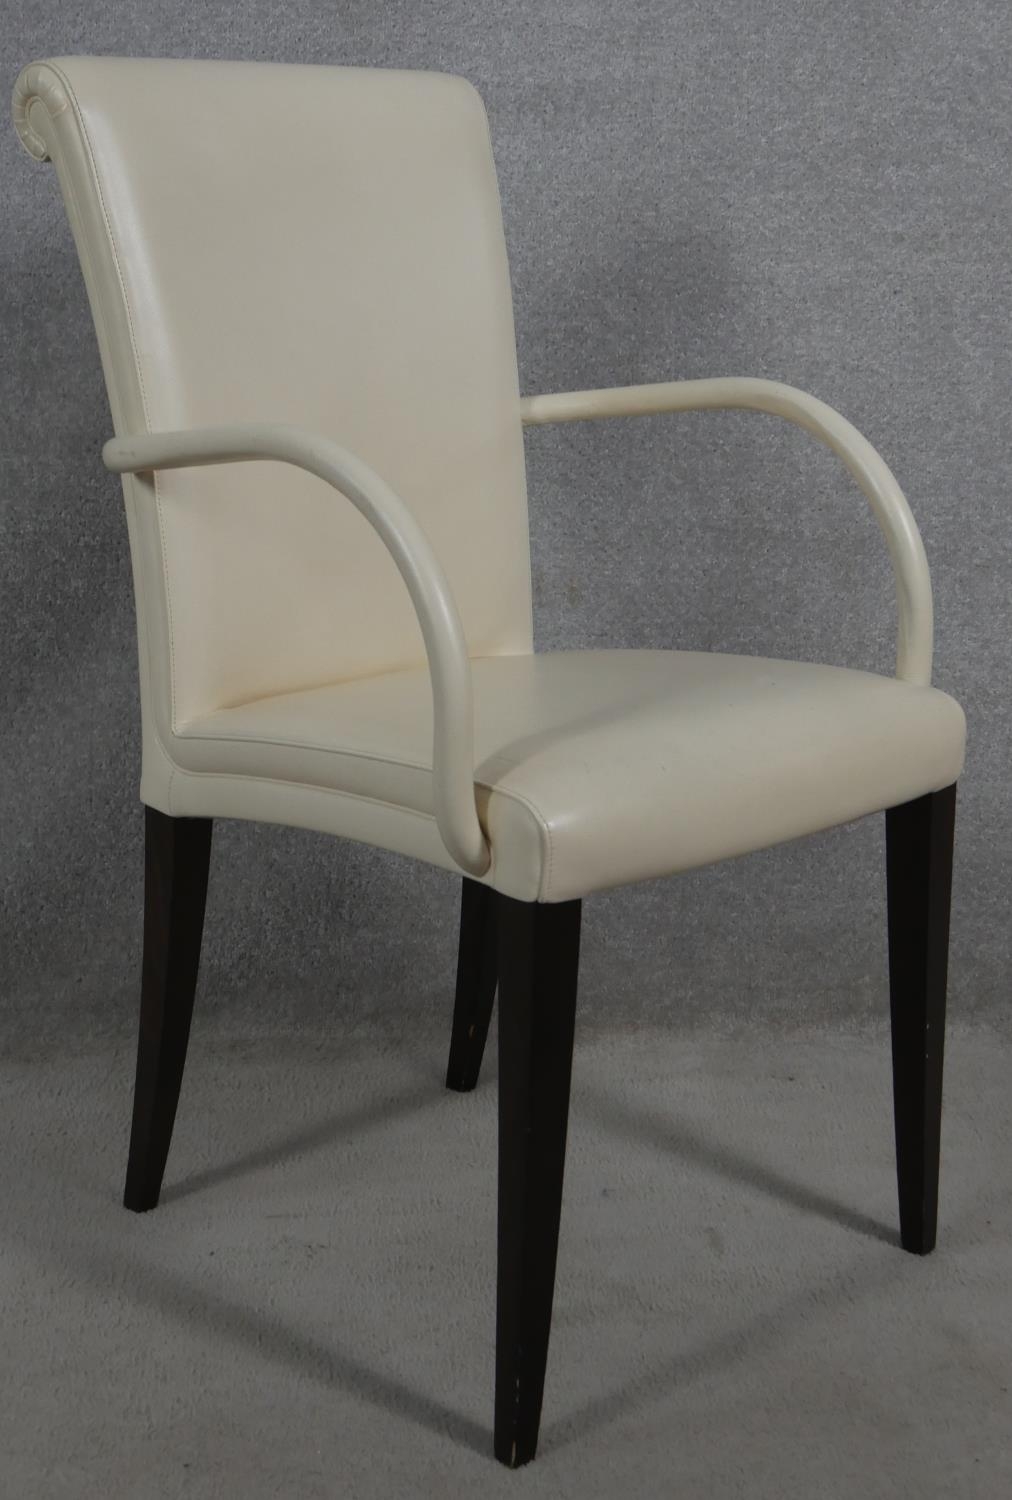 A set of seven contemporary Poltrona Frau Vittoria model dining armchairs in leather upholstery on - Image 3 of 5